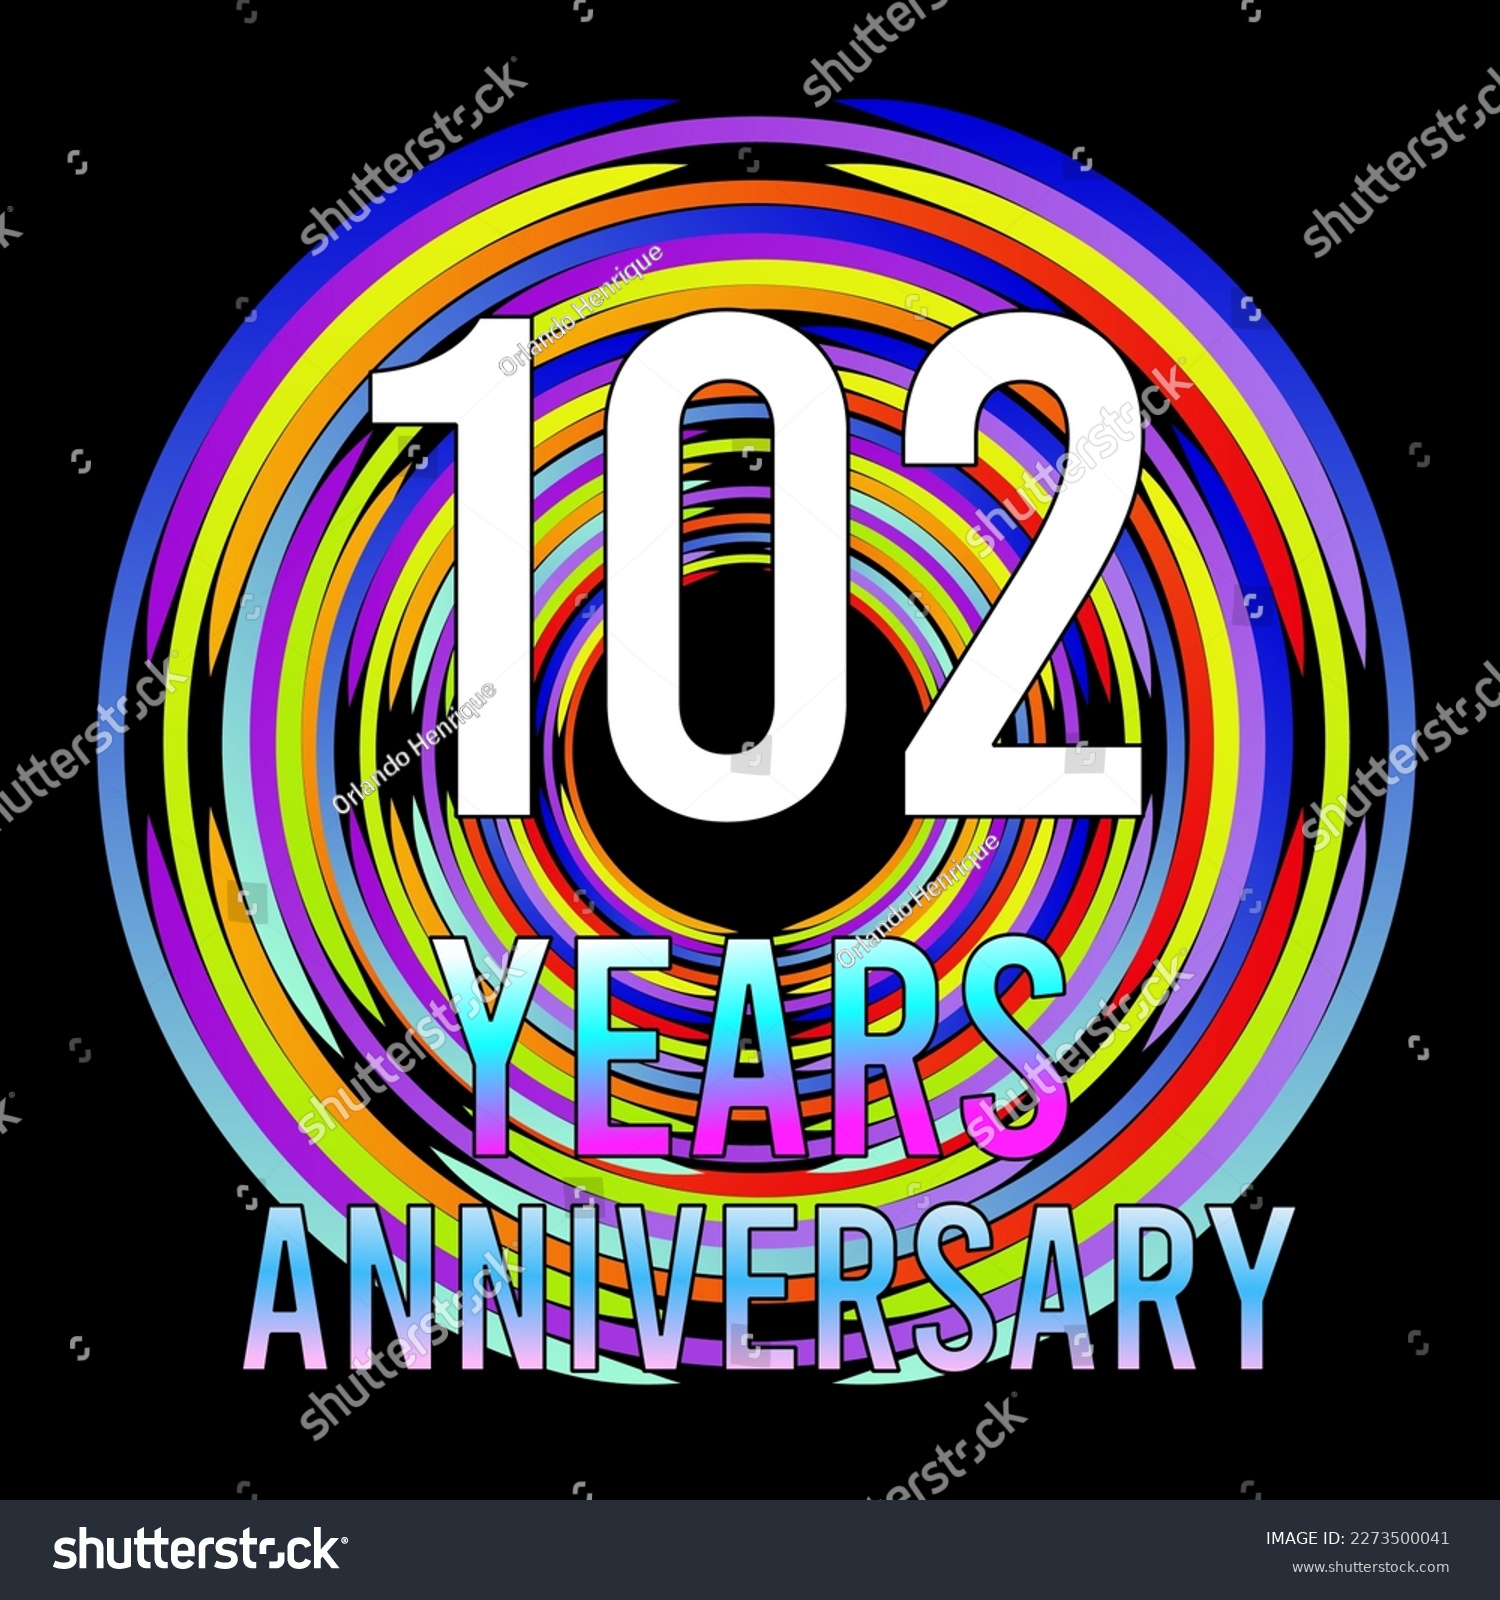 SVG of 102 years anniversary, for anniversary and anniversary celebration logo, vector design colorful isolated on  black background svg